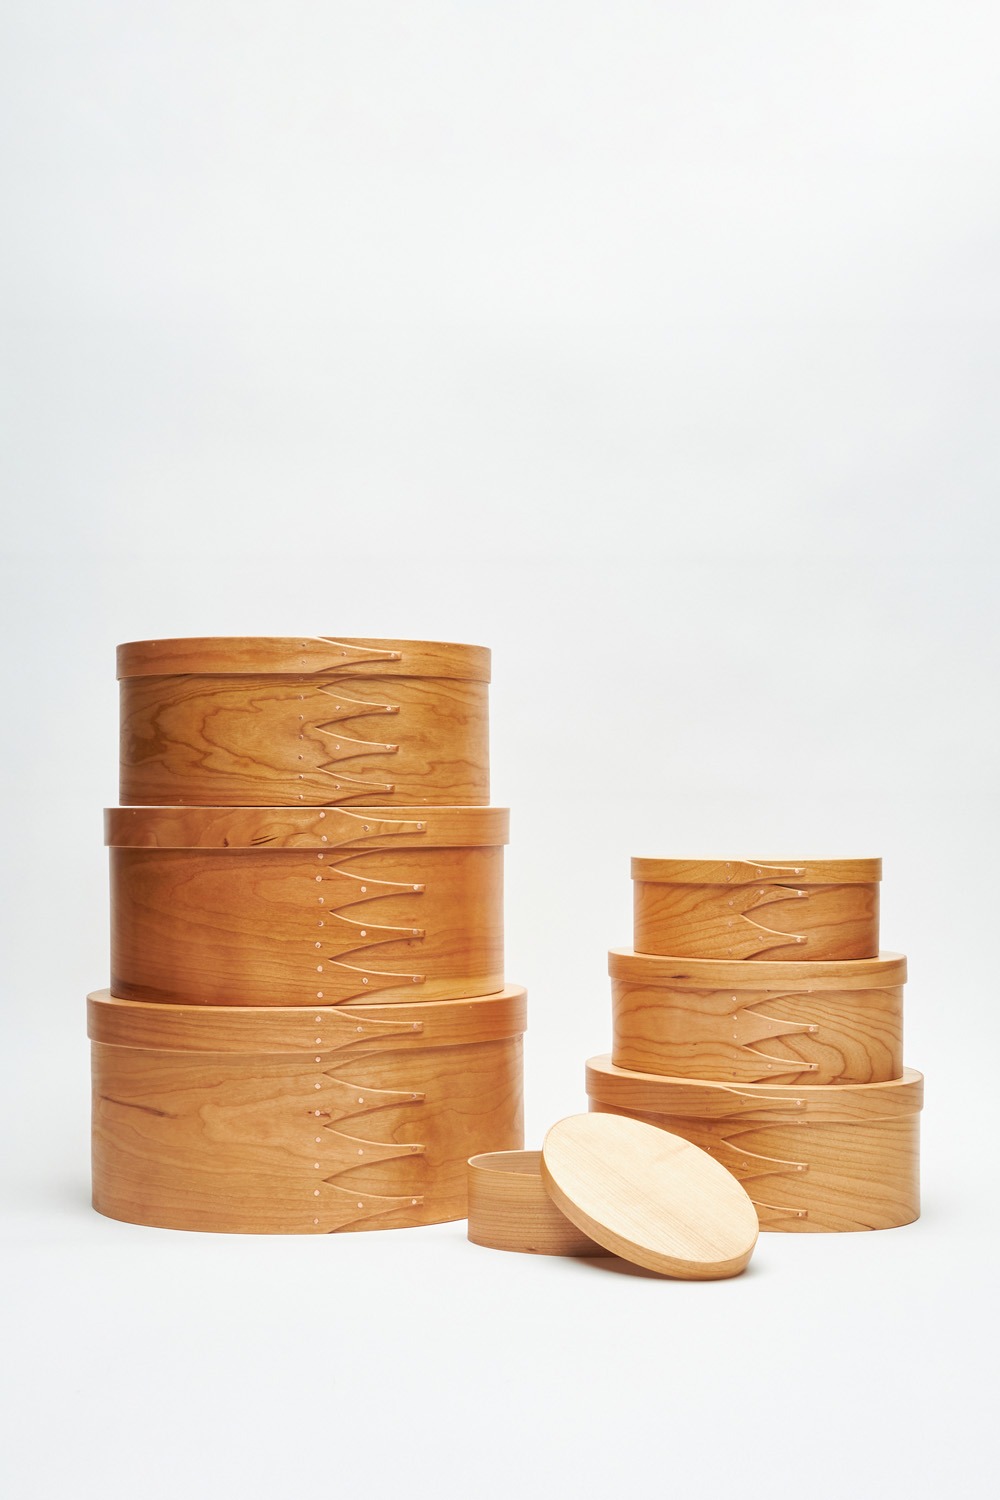 Shaker Oval Boxes-Cherry